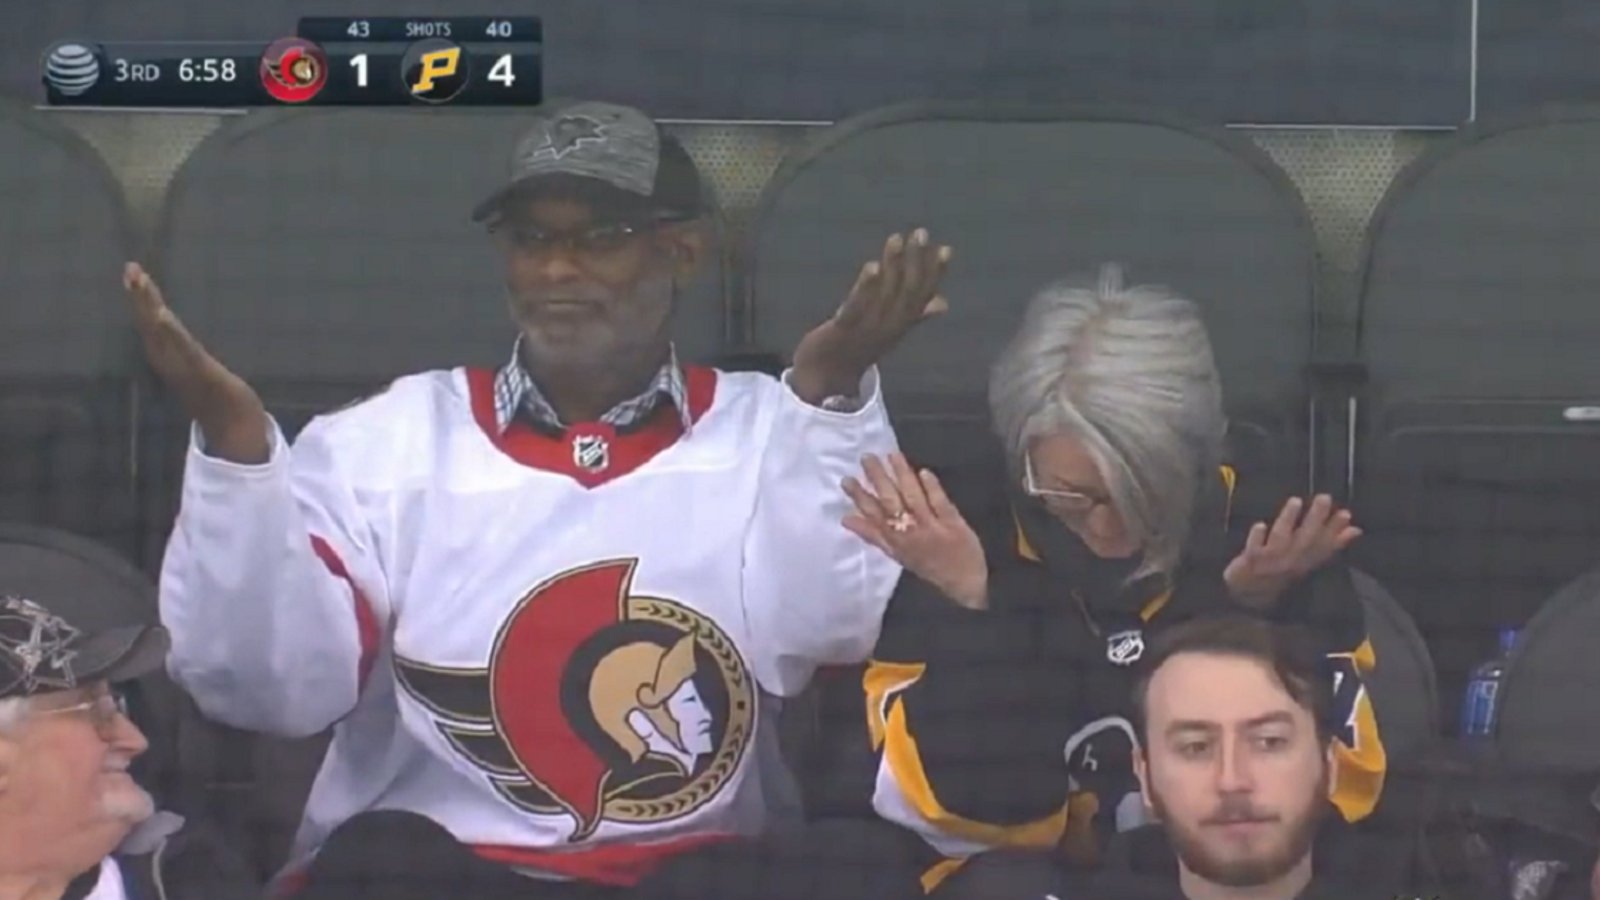 Mom and Dad crack up after both their sons get hauled off with matching penalties.